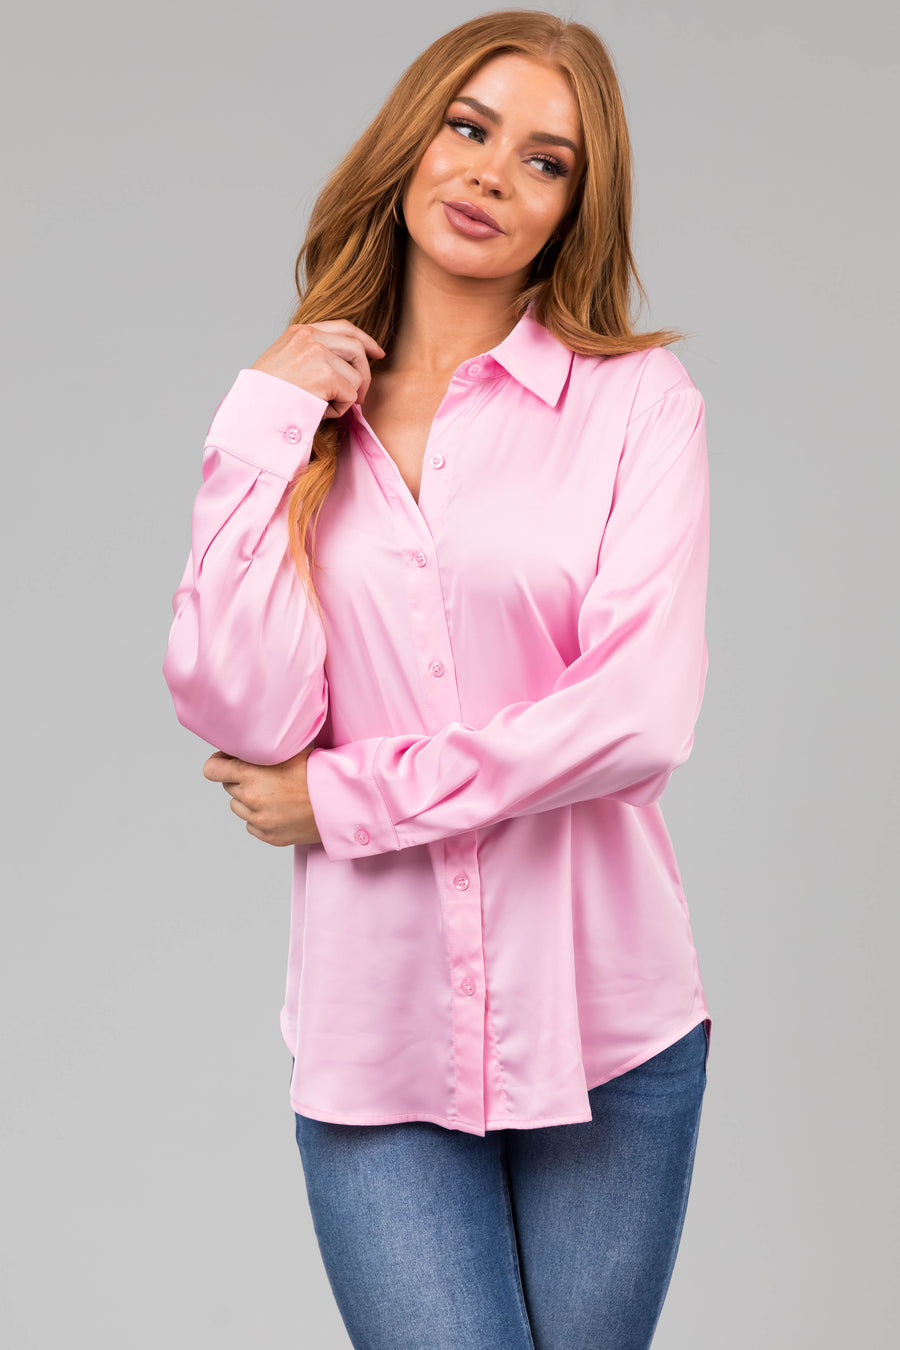 Cute & Sexy Valentine's Day Shirts for Women, Lime Lush Boutique